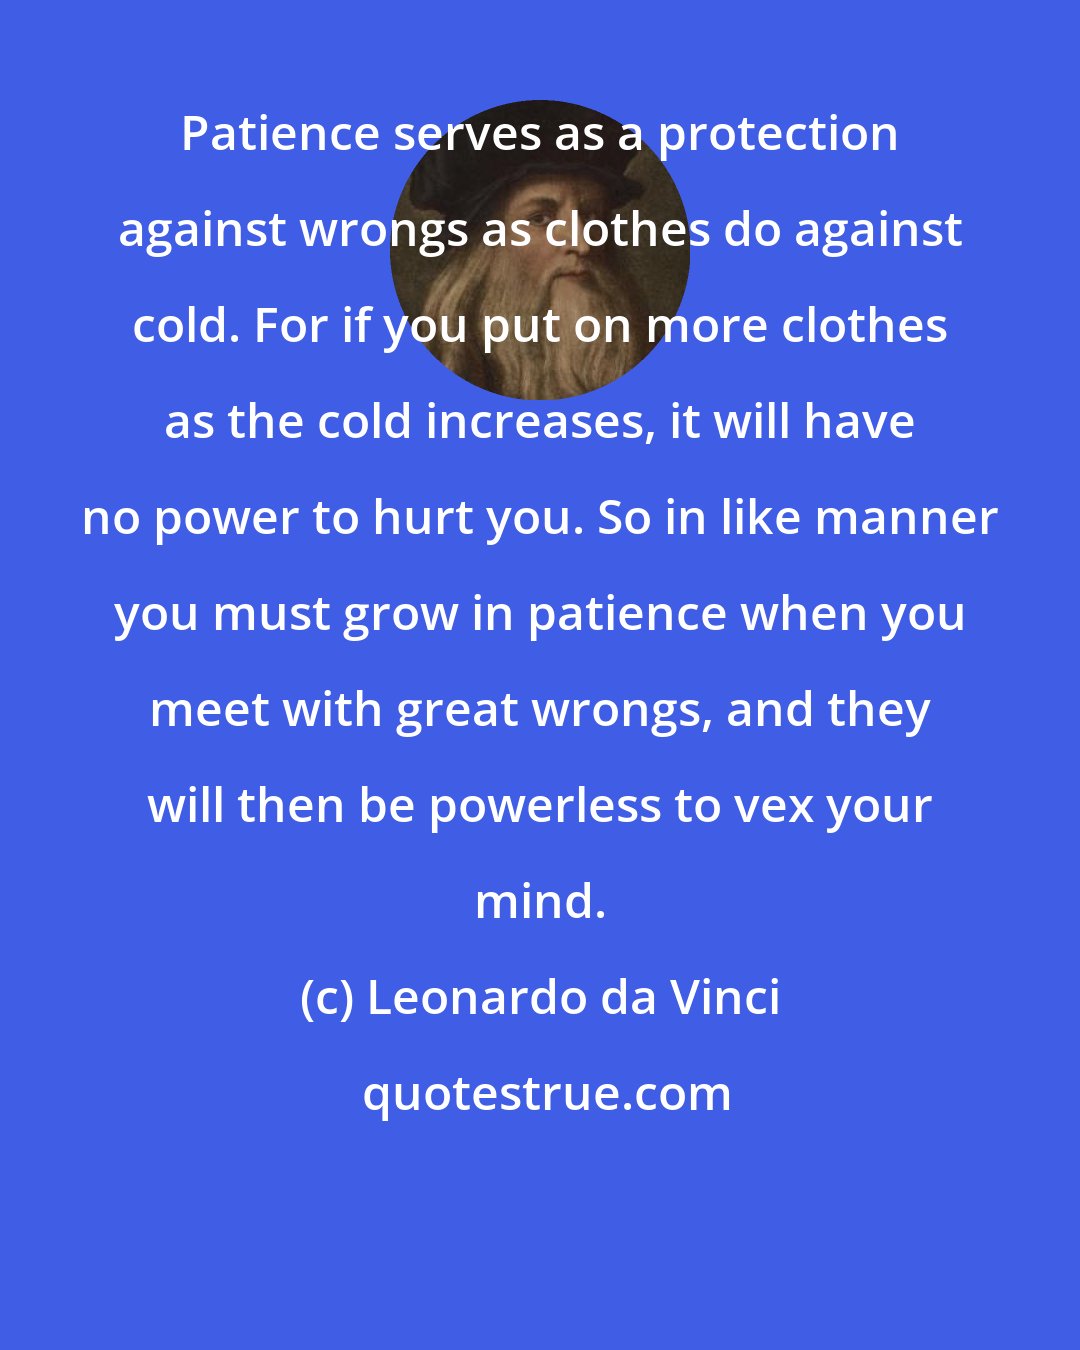 Leonardo da Vinci: Patience serves as a protection against wrongs as clothes do against cold. For if you put on more clothes as the cold increases, it will have no power to hurt you. So in like manner you must grow in patience when you meet with great wrongs, and they will then be powerless to vex your mind.